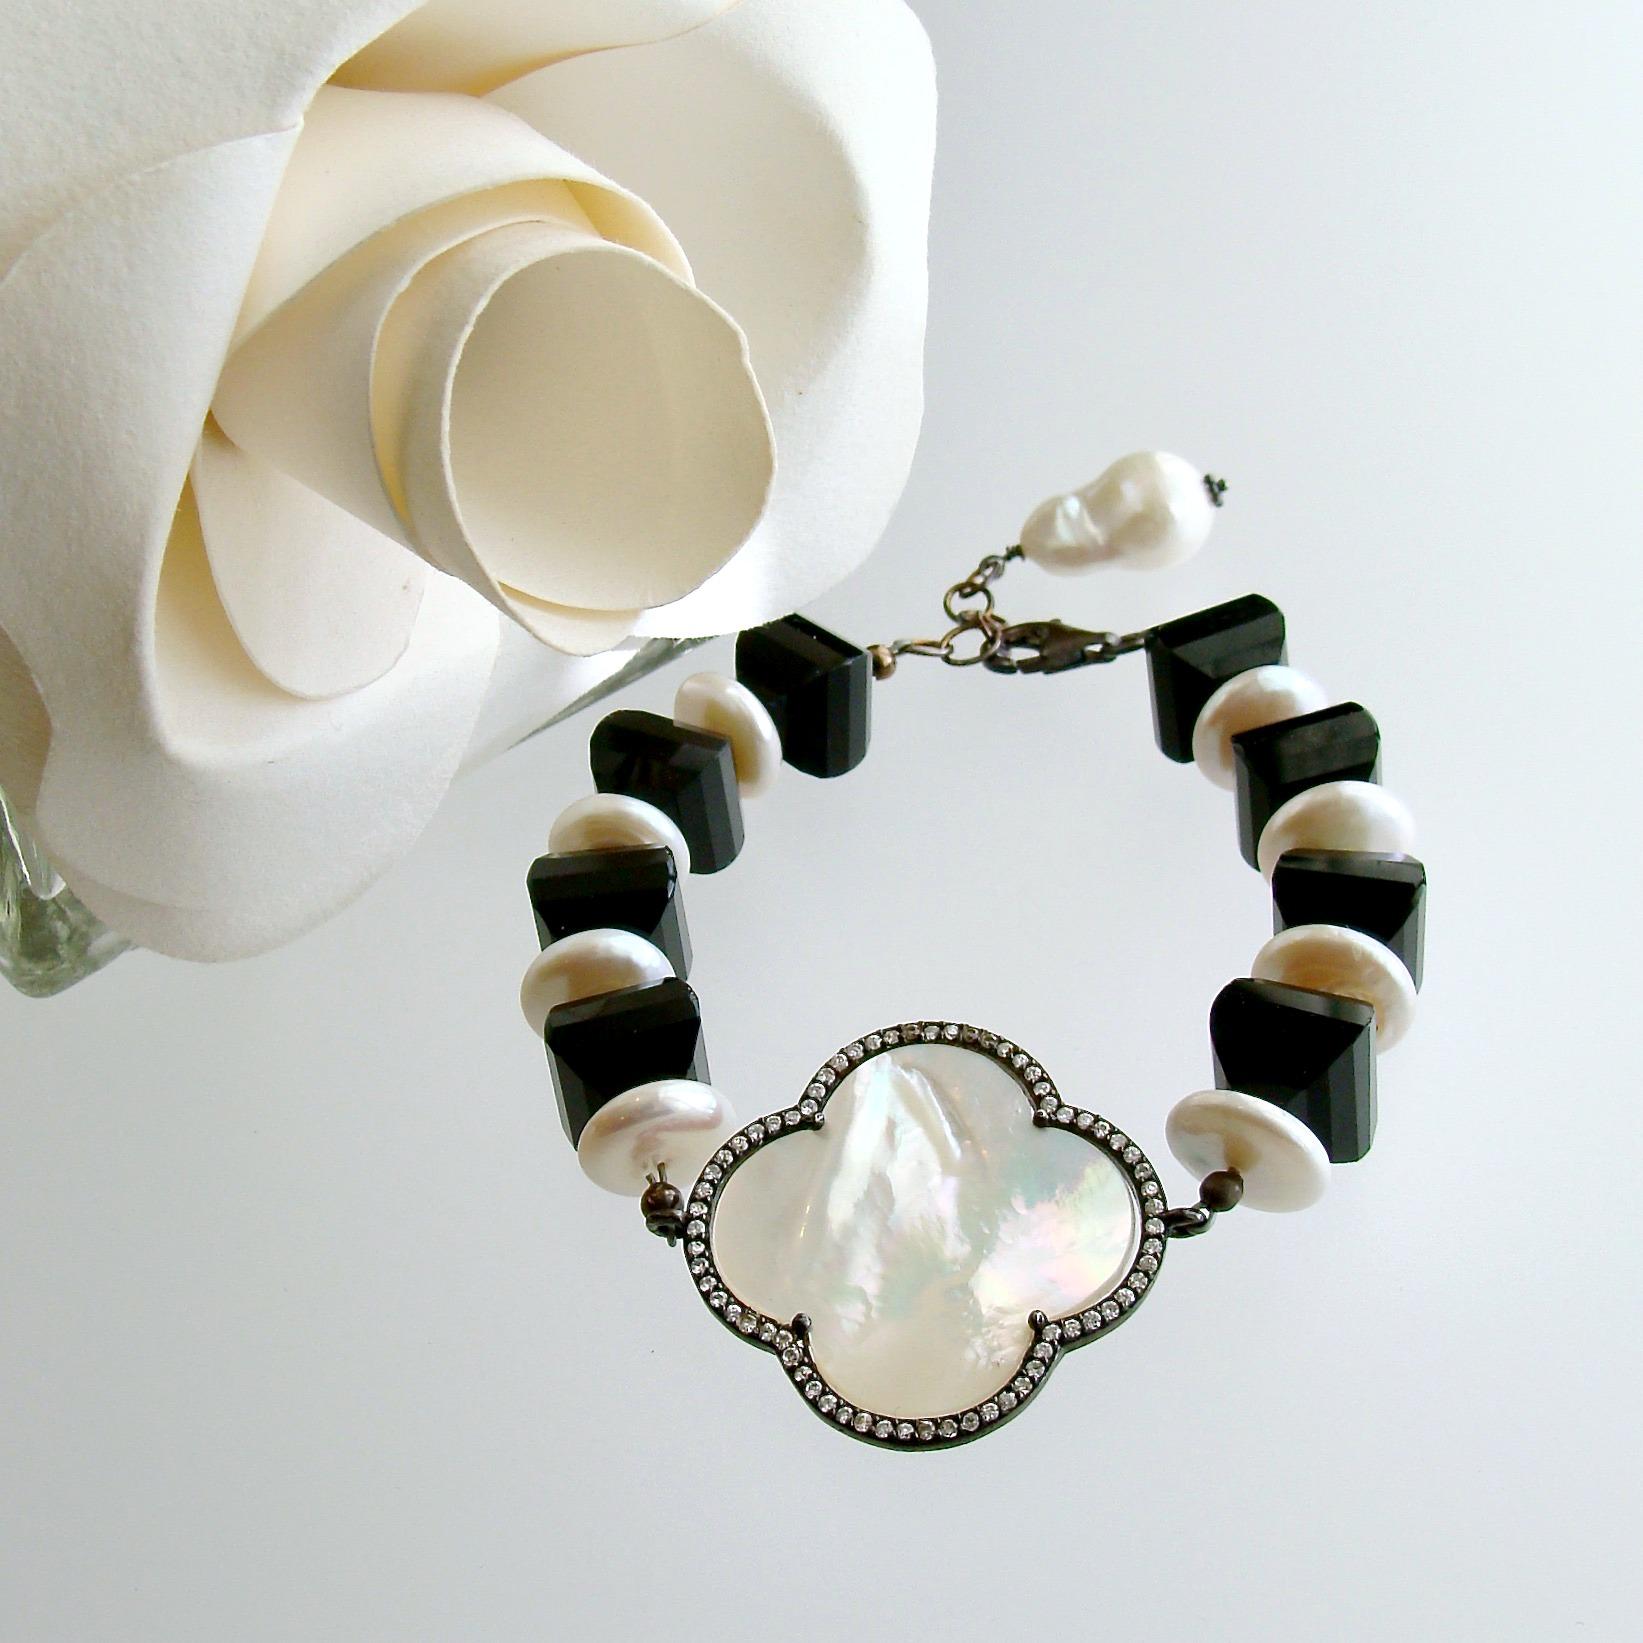 There is simply nothing as refreshing as a simplistic design rendered in black and white.  This bracelet of highly polished black onyx lanterns alternates with creamy white coin pearls and features a mother of pearl quatrefoil accented with pave